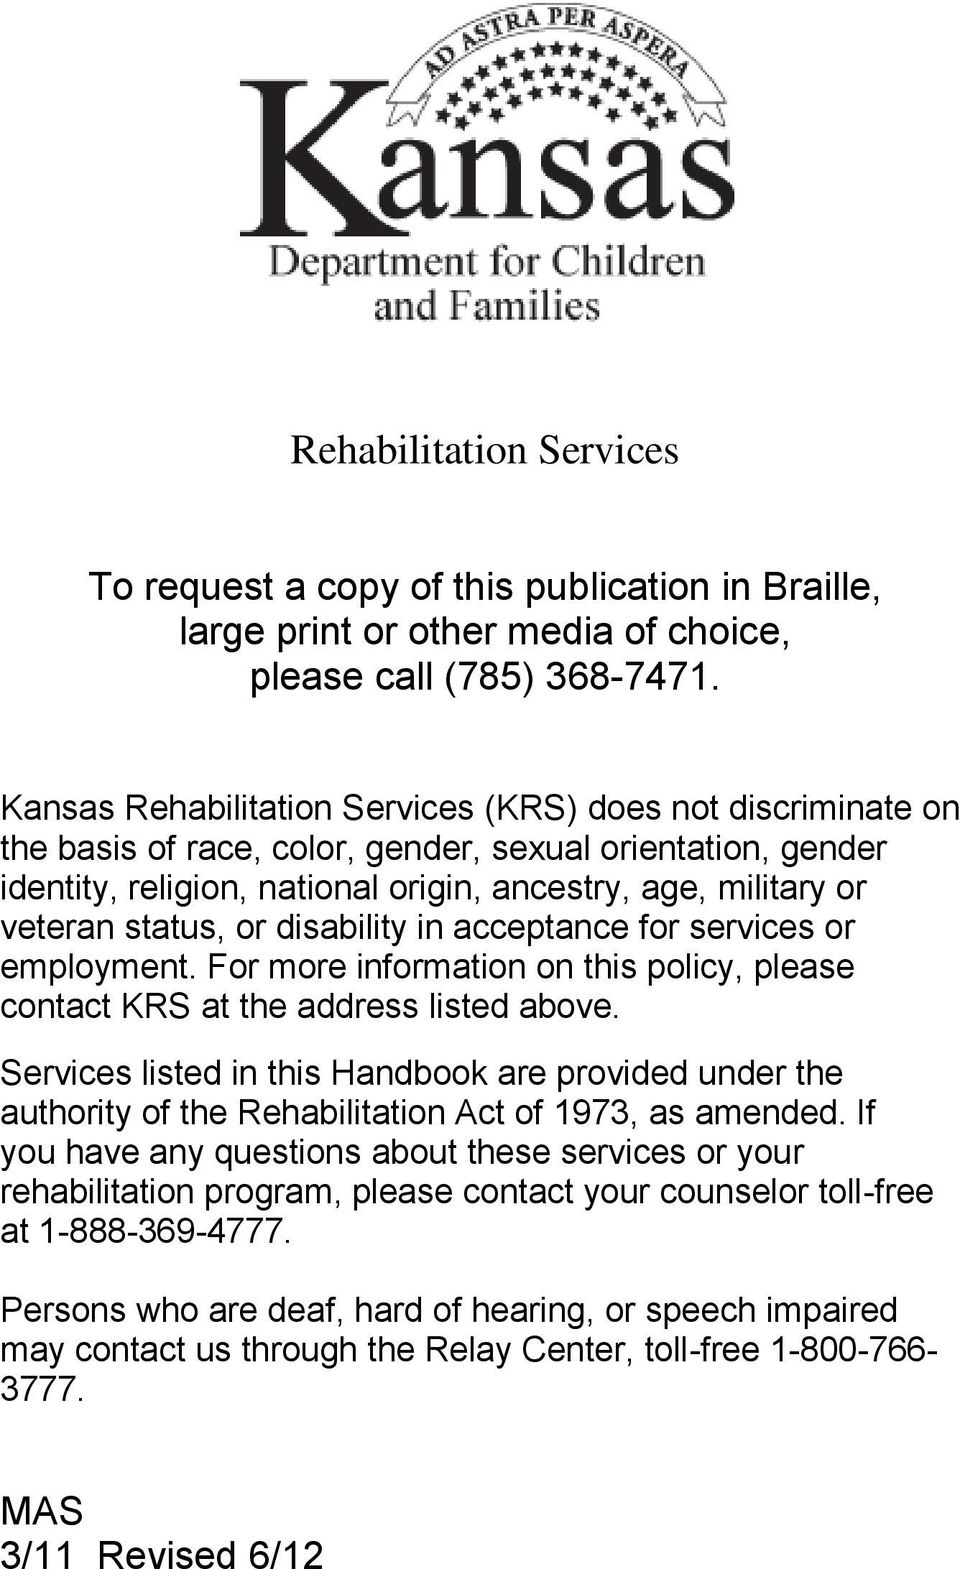 status, or disability in acceptance for services or employment. For more information on this policy, please contact KRS at the address listed above.